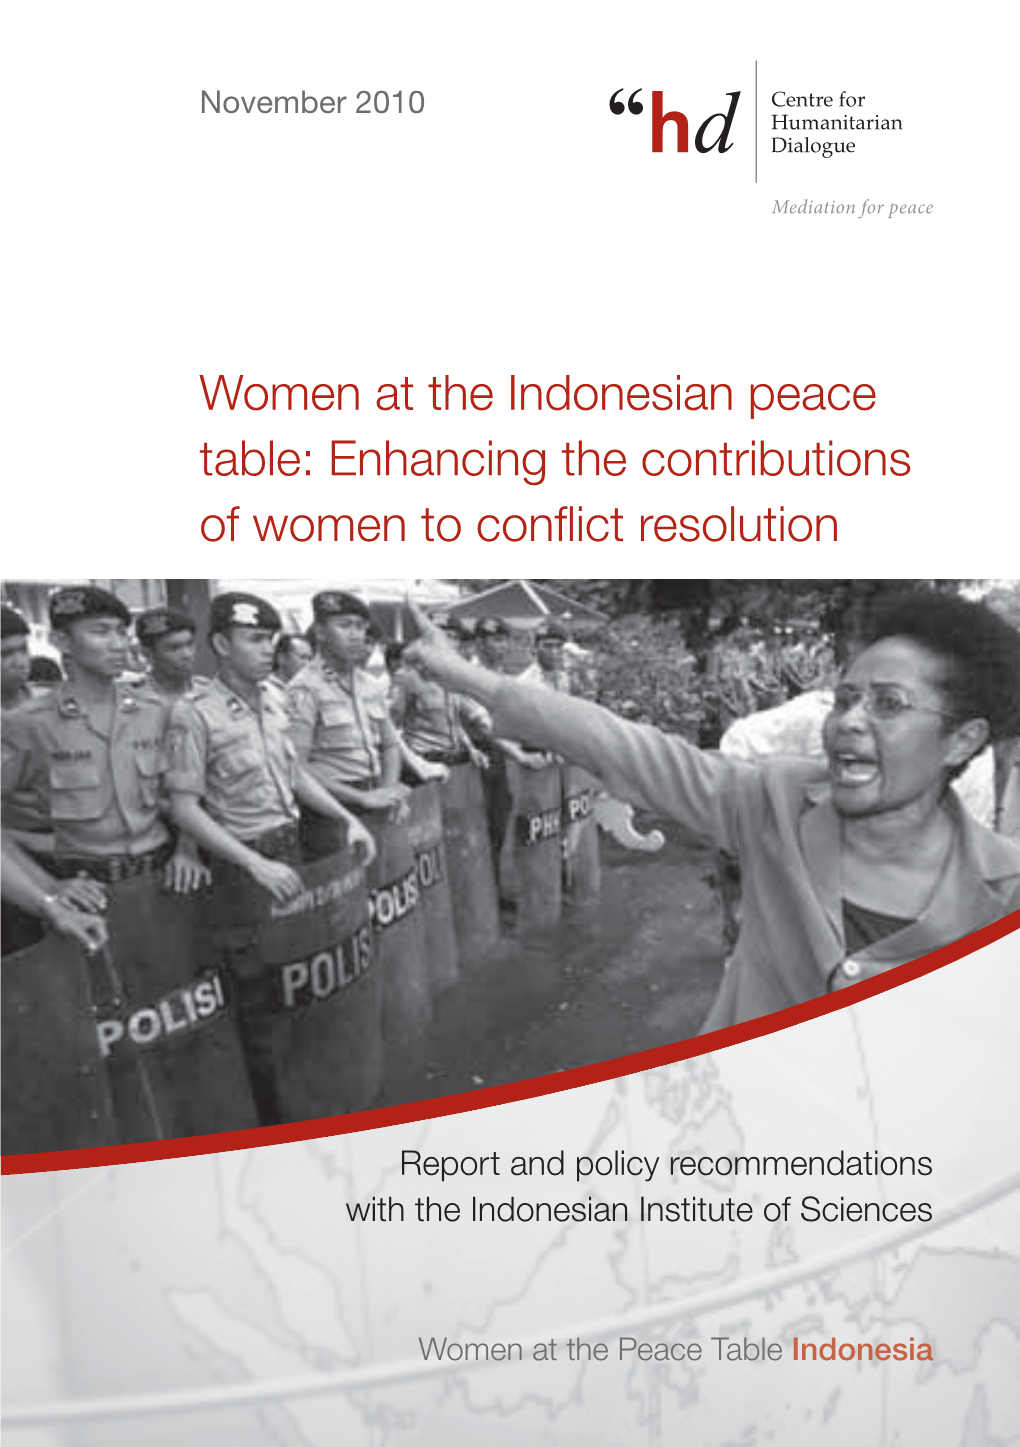 Women at the Indonesian Peace Table: Enhancing the Contributions of Women to Conﬂict Resolution